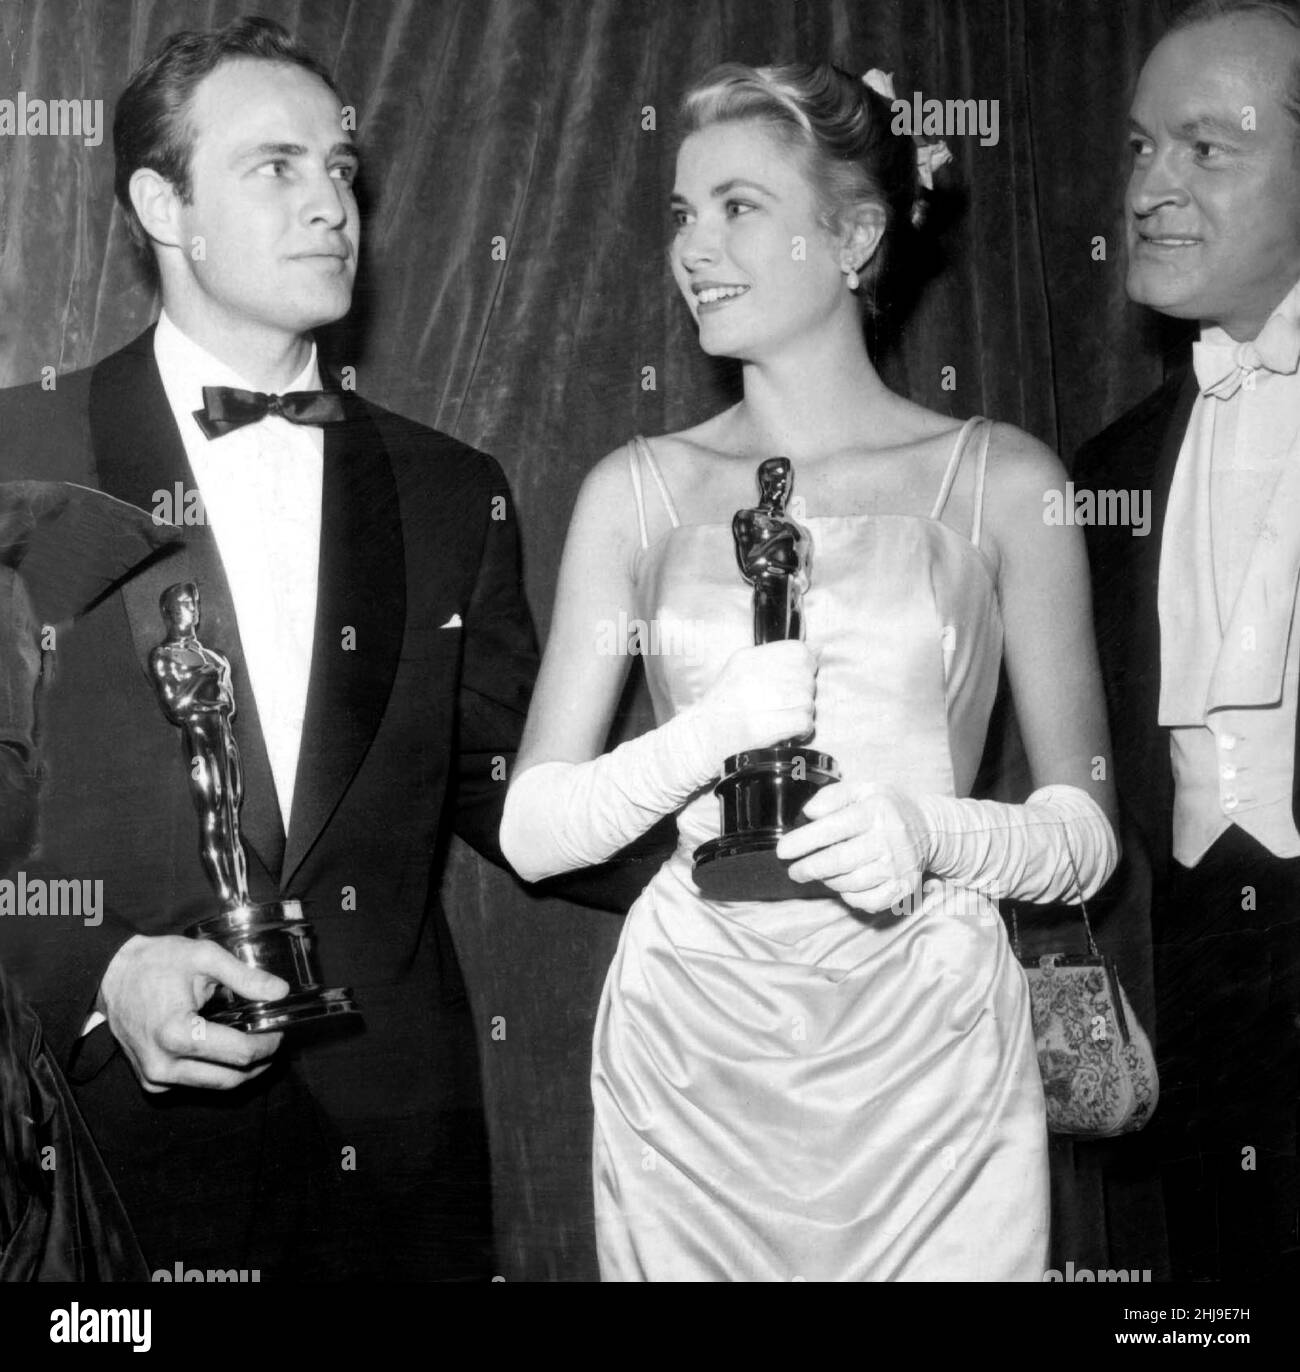 March 30, 1955, New York, New York, USA: MARLON BRANDO (L) and GRACE KELLY holding their oscar statuettes at the 27th Academy Awards, with host BOB HOPE at right. Kelly won Best Actress for her performance in 'The Country Girl'. Marlon Brando was Best actor winner for his performance in the movie 'On The Waterfront.' (Credit Image: © Globe Photos/ZUMA Wire) Stock Photo